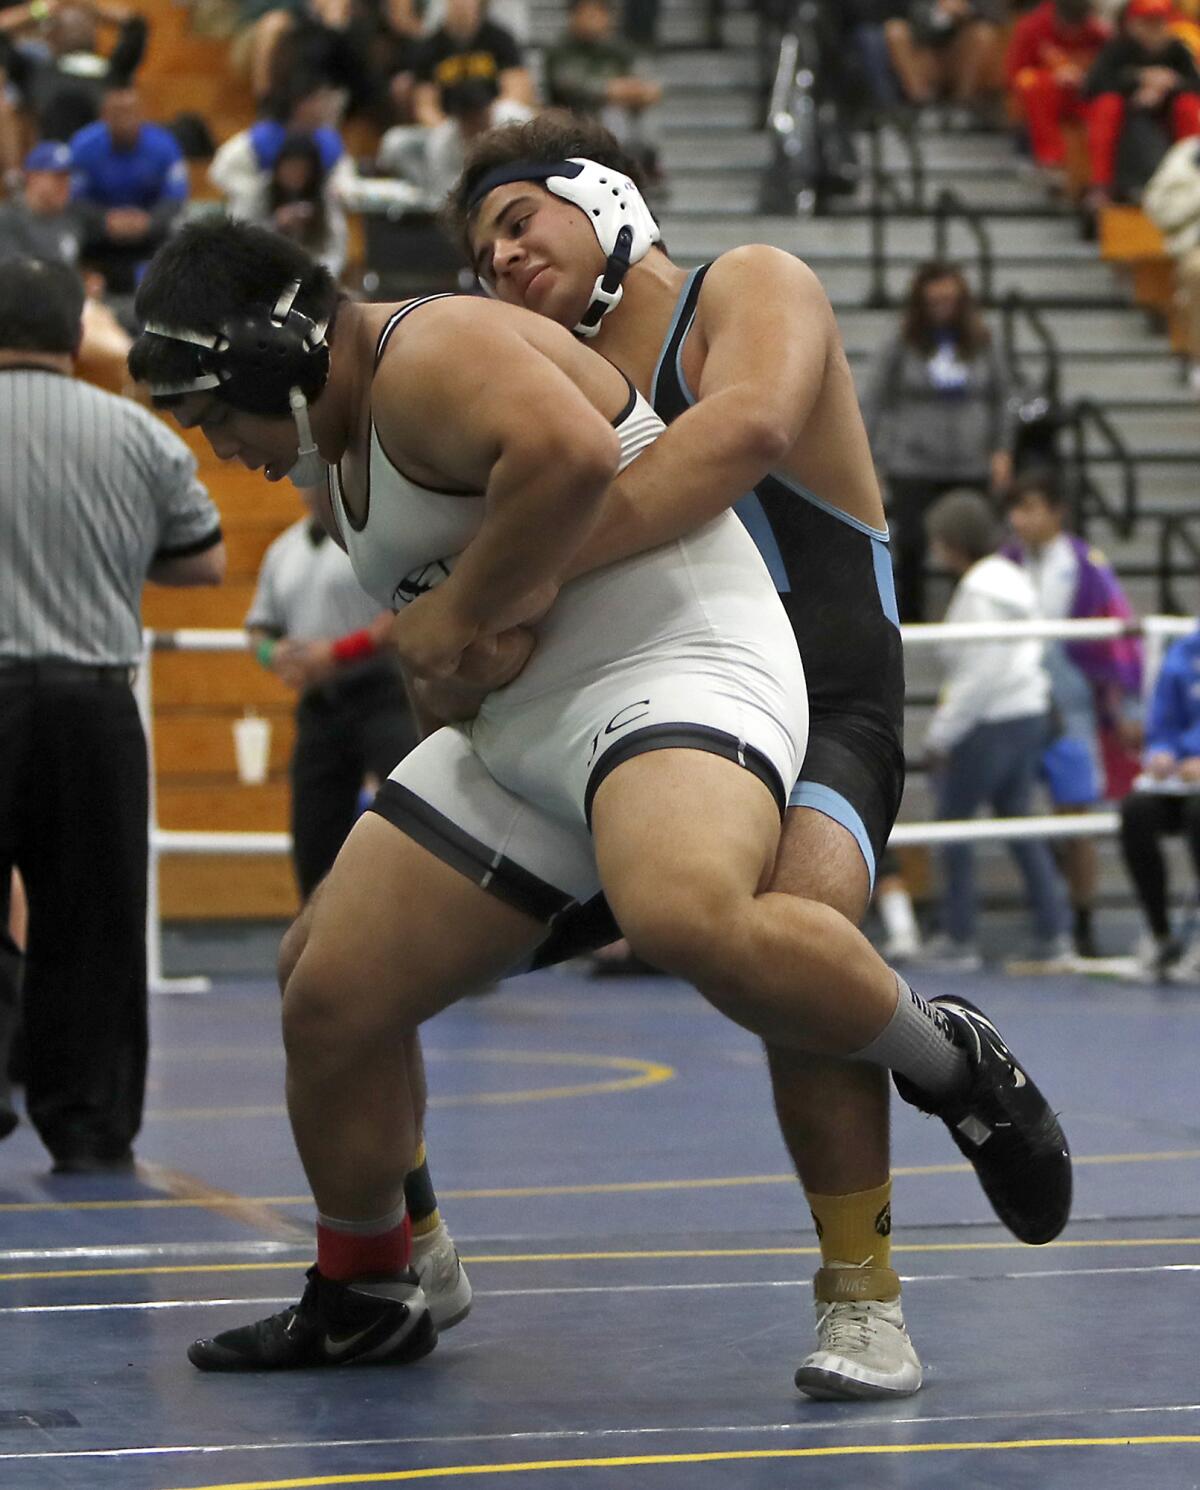 Corona del Mar's Emilio Franco competes against Northview's Rigo Estrada in a 220-pound match during the Five Counties wrestling tournament at Fountain Valley High on Saturday.